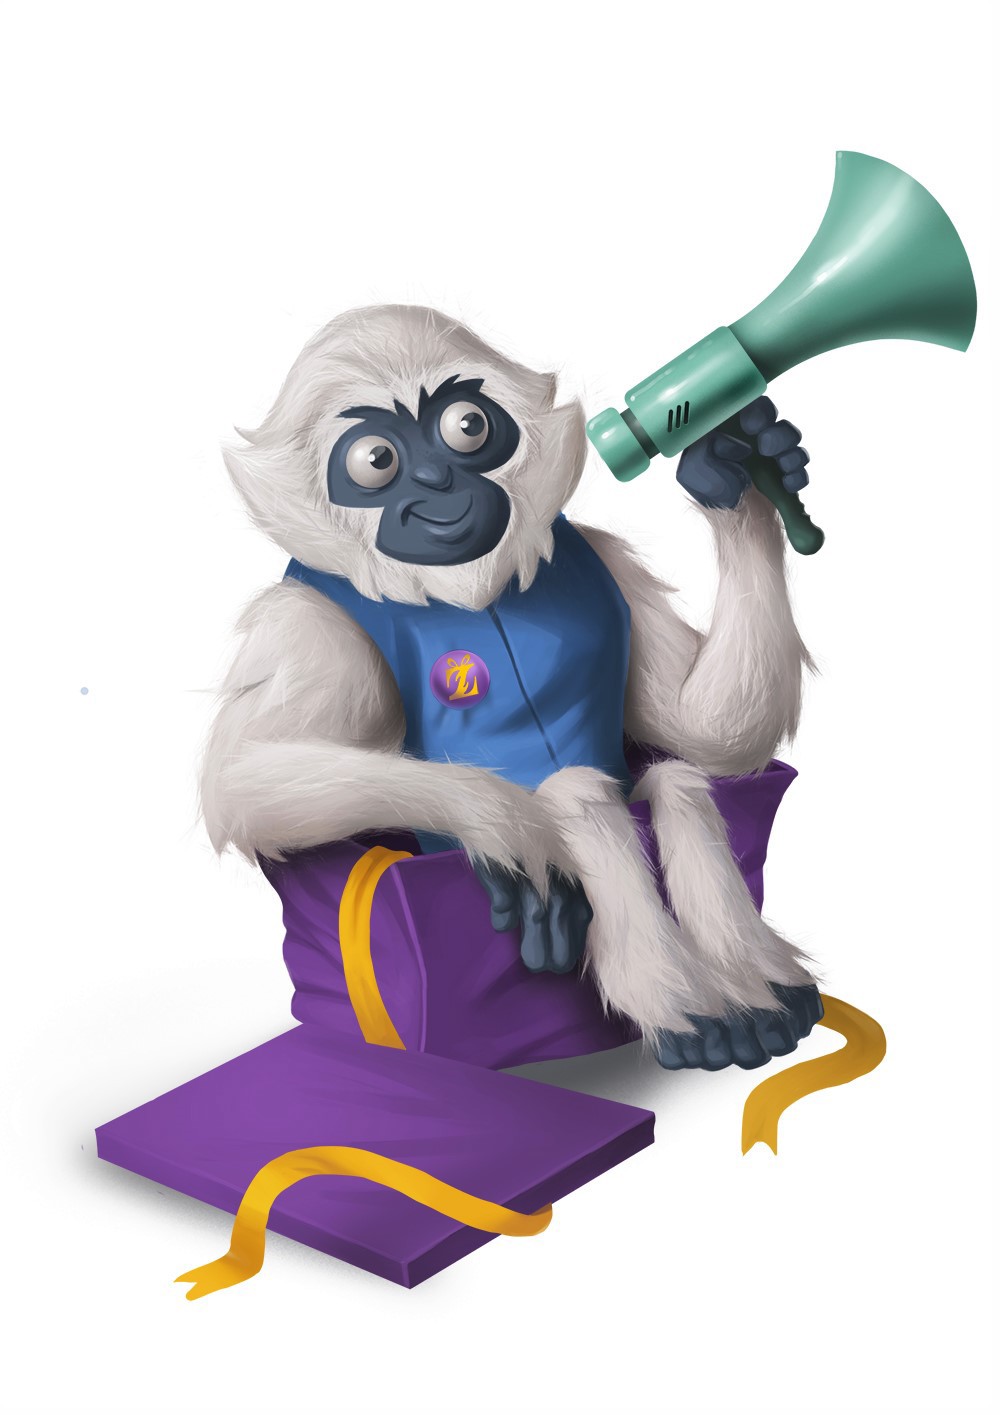 White monkey sat in a box holding a loudspeaker - Digital Painting